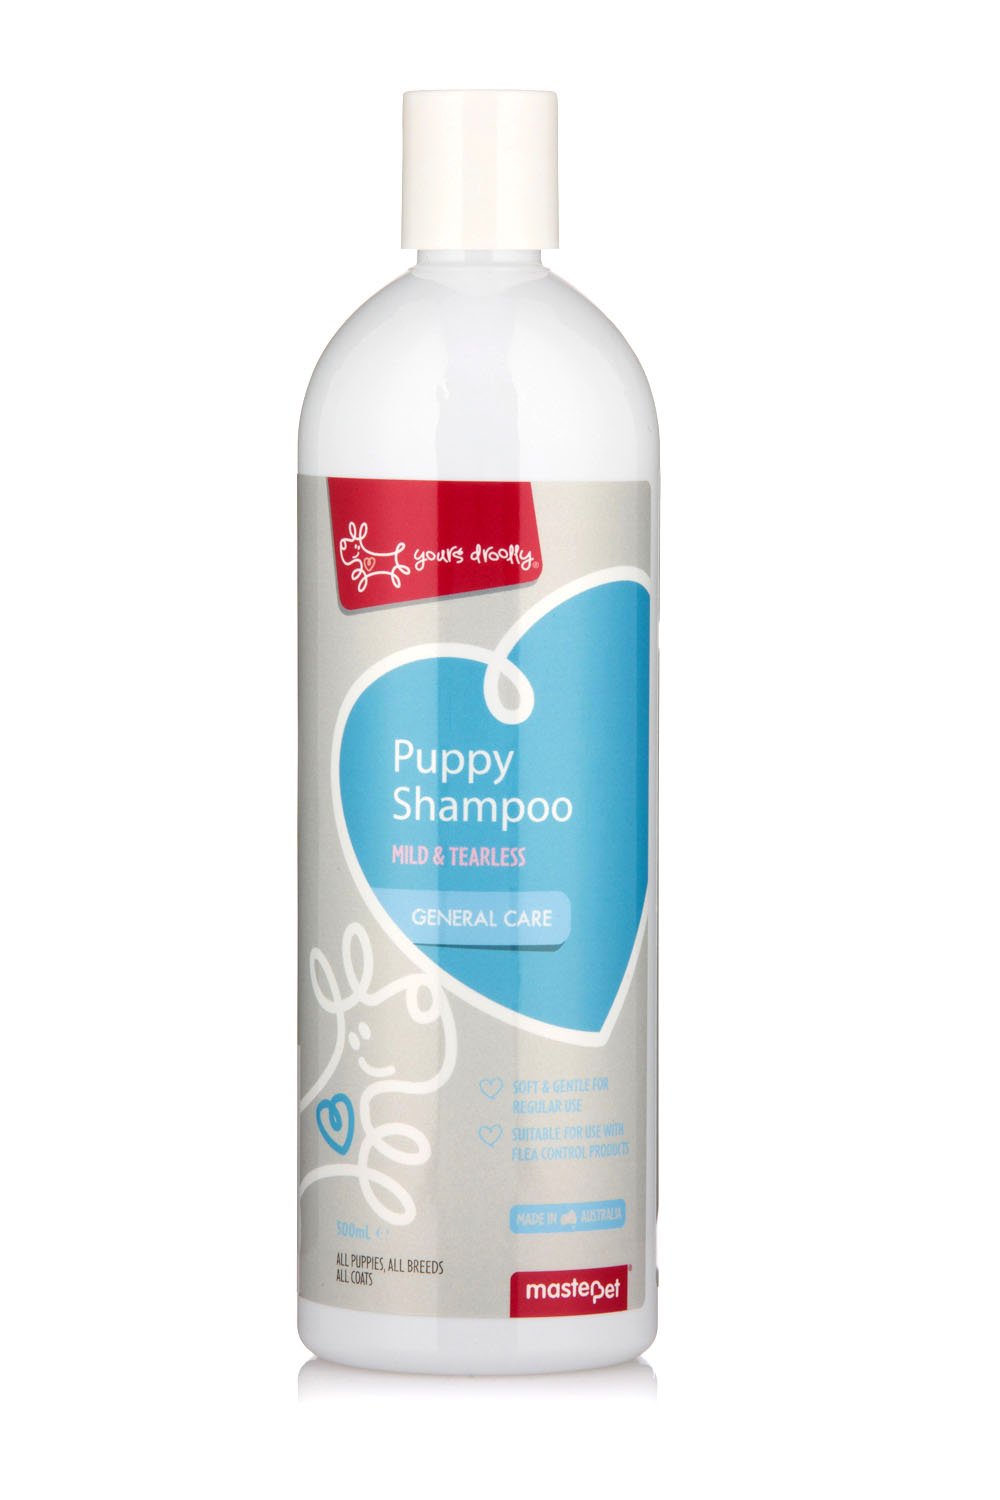 Yours Droolly Puppy Shampoo 500ml - RSPCA VIC